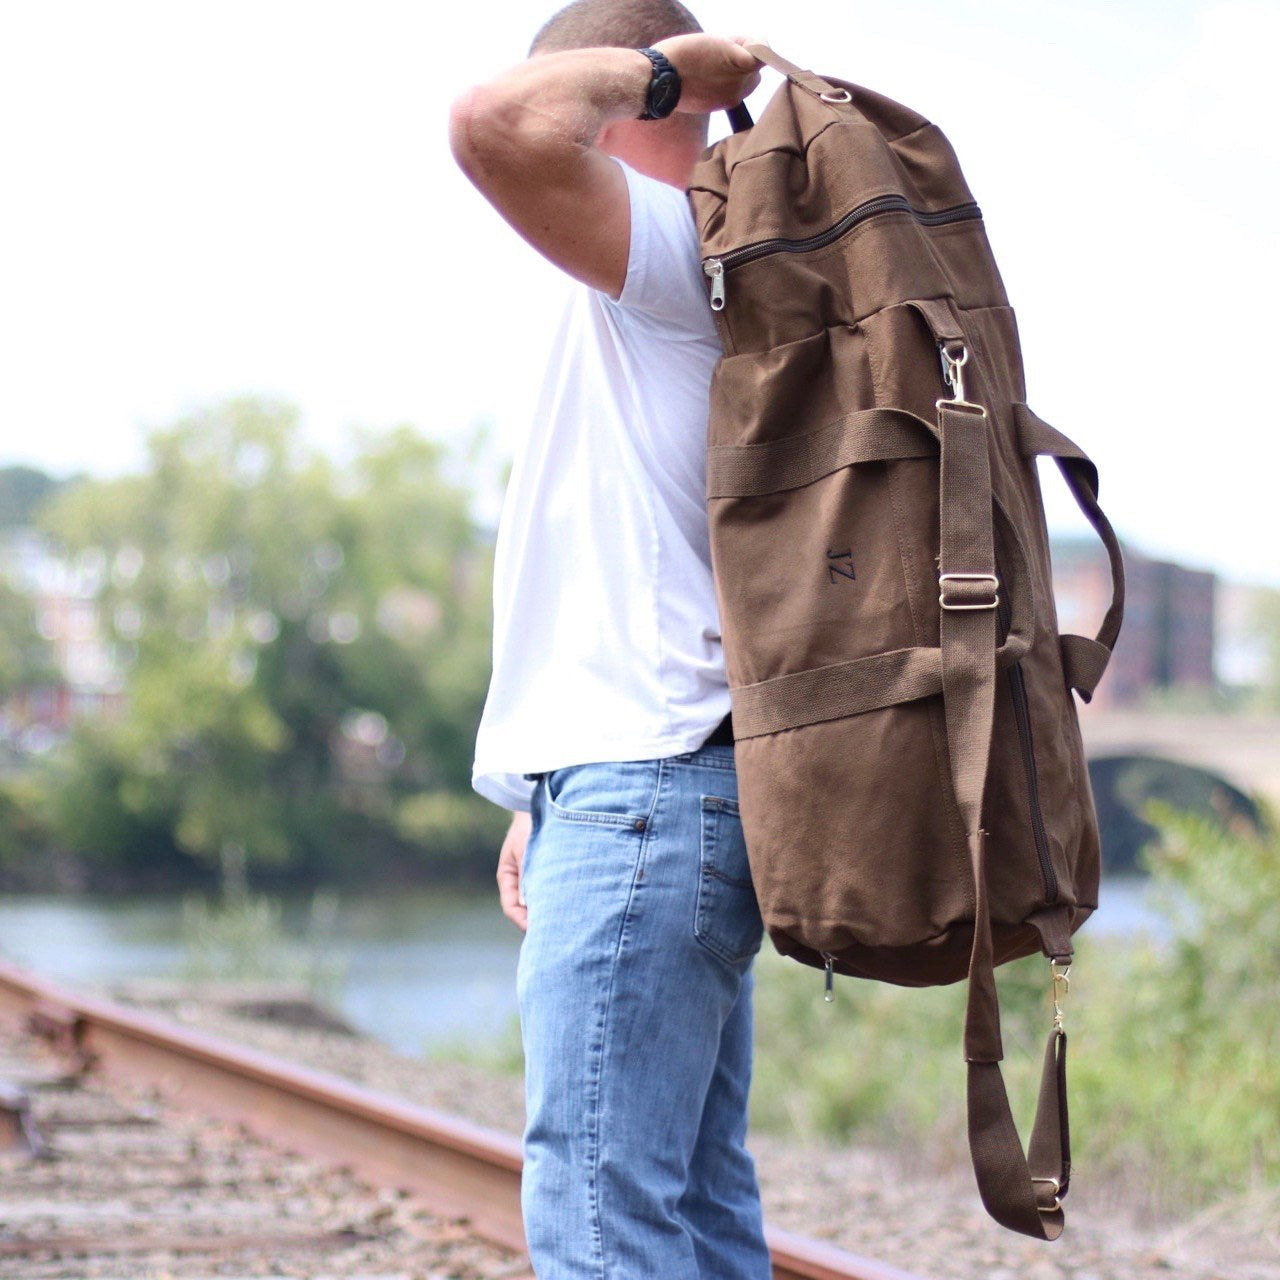 Authentic waxed canvas bags - backpack, messenger bag, duffle bag